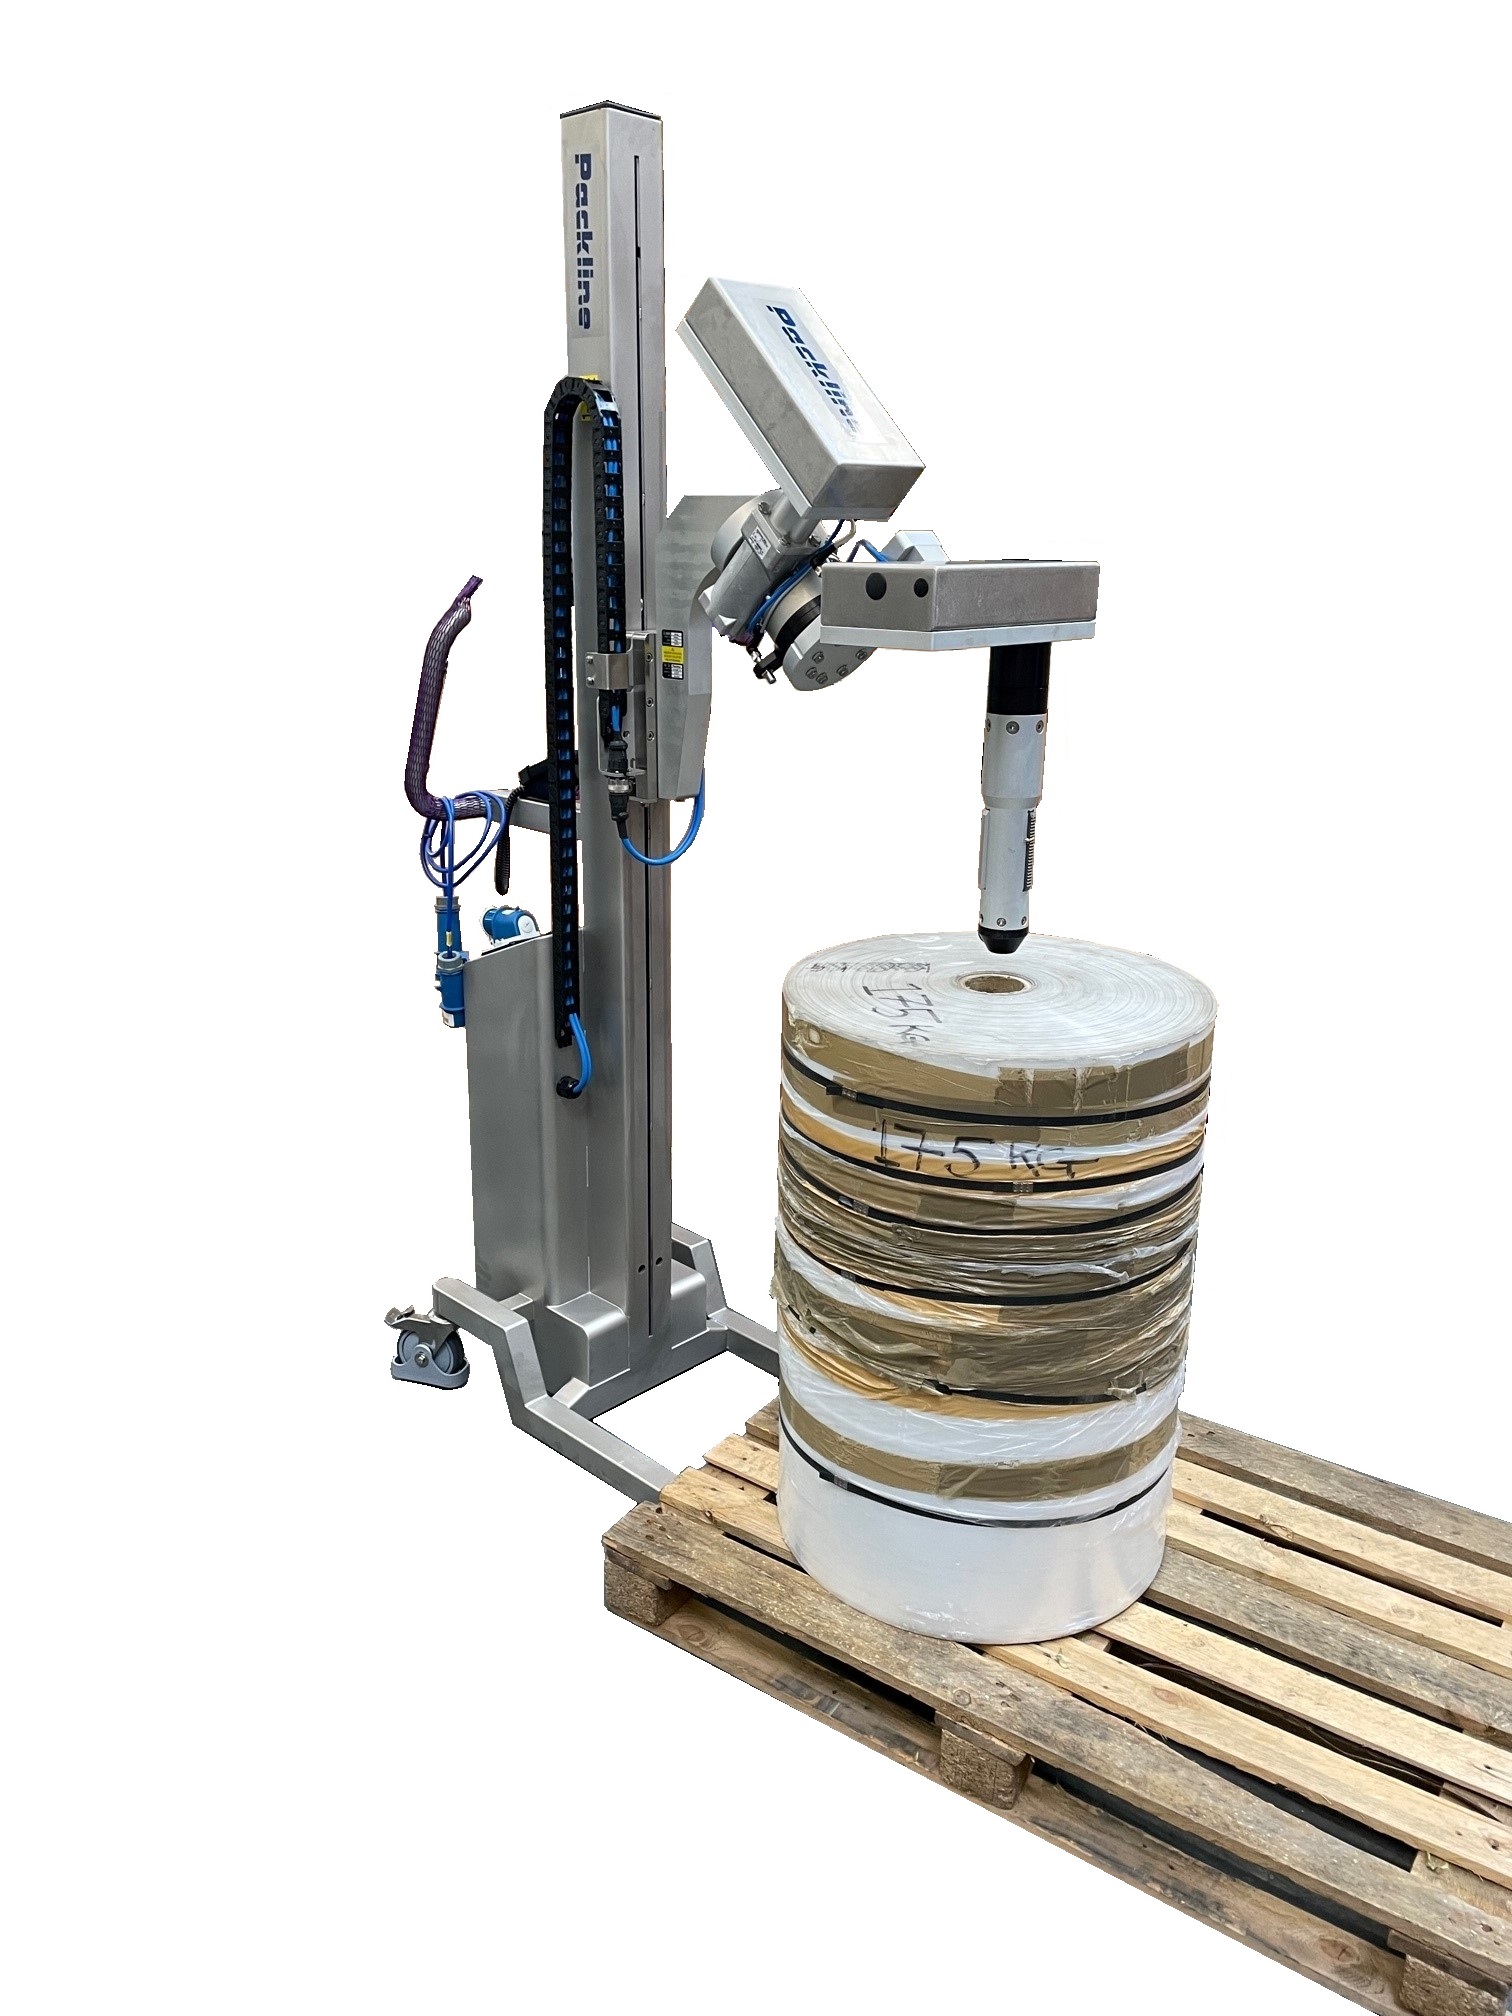 The stainless bespoke fully powered vertical spindle attachment with upgraded electronics was designed to safely lift and rotate rolls of film and foil.